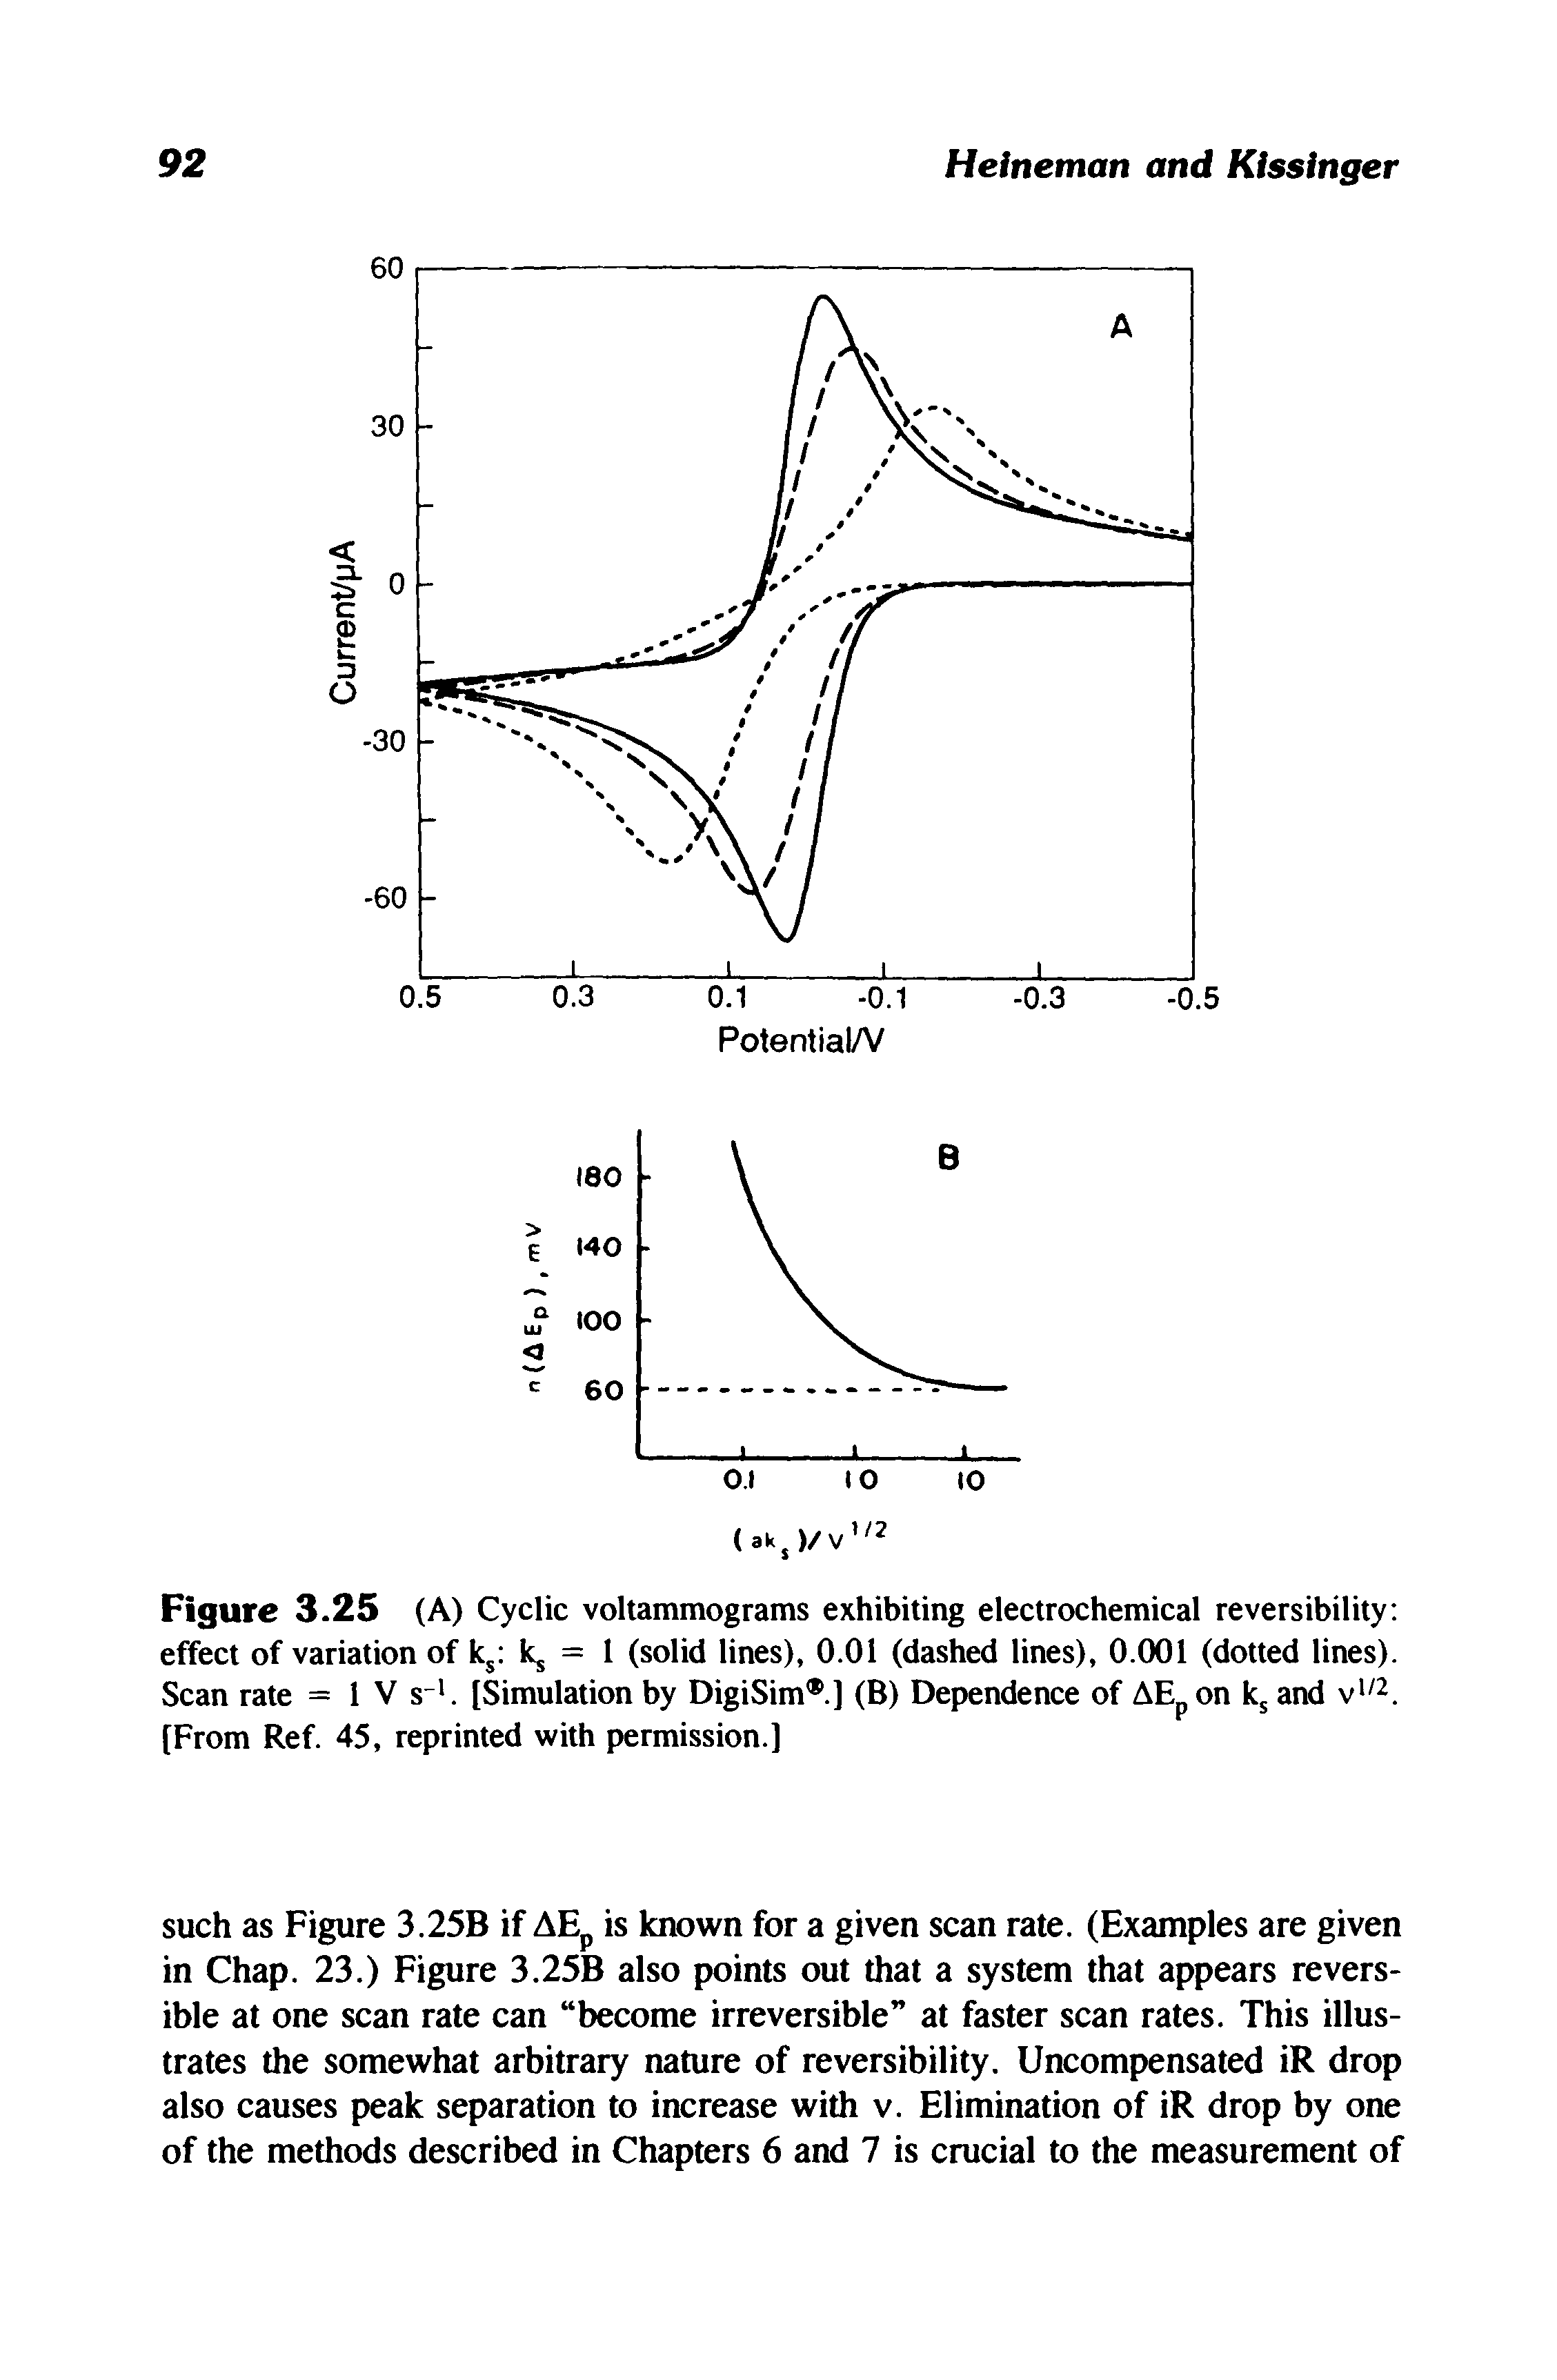 Figure 3.25 (A) Cyclic voltammograms exhibiting electrochemical reversibility effect of variation of ks kj = 1 (solid lines), 0.01 (dashed lines), 0.001 (dotted lines). Scan rate = 1 V s1. [Simulation by DigiSim .] (B) Dependence of AEpon ks and vl/2. [From Ref. 45, reprinted with permission.]...